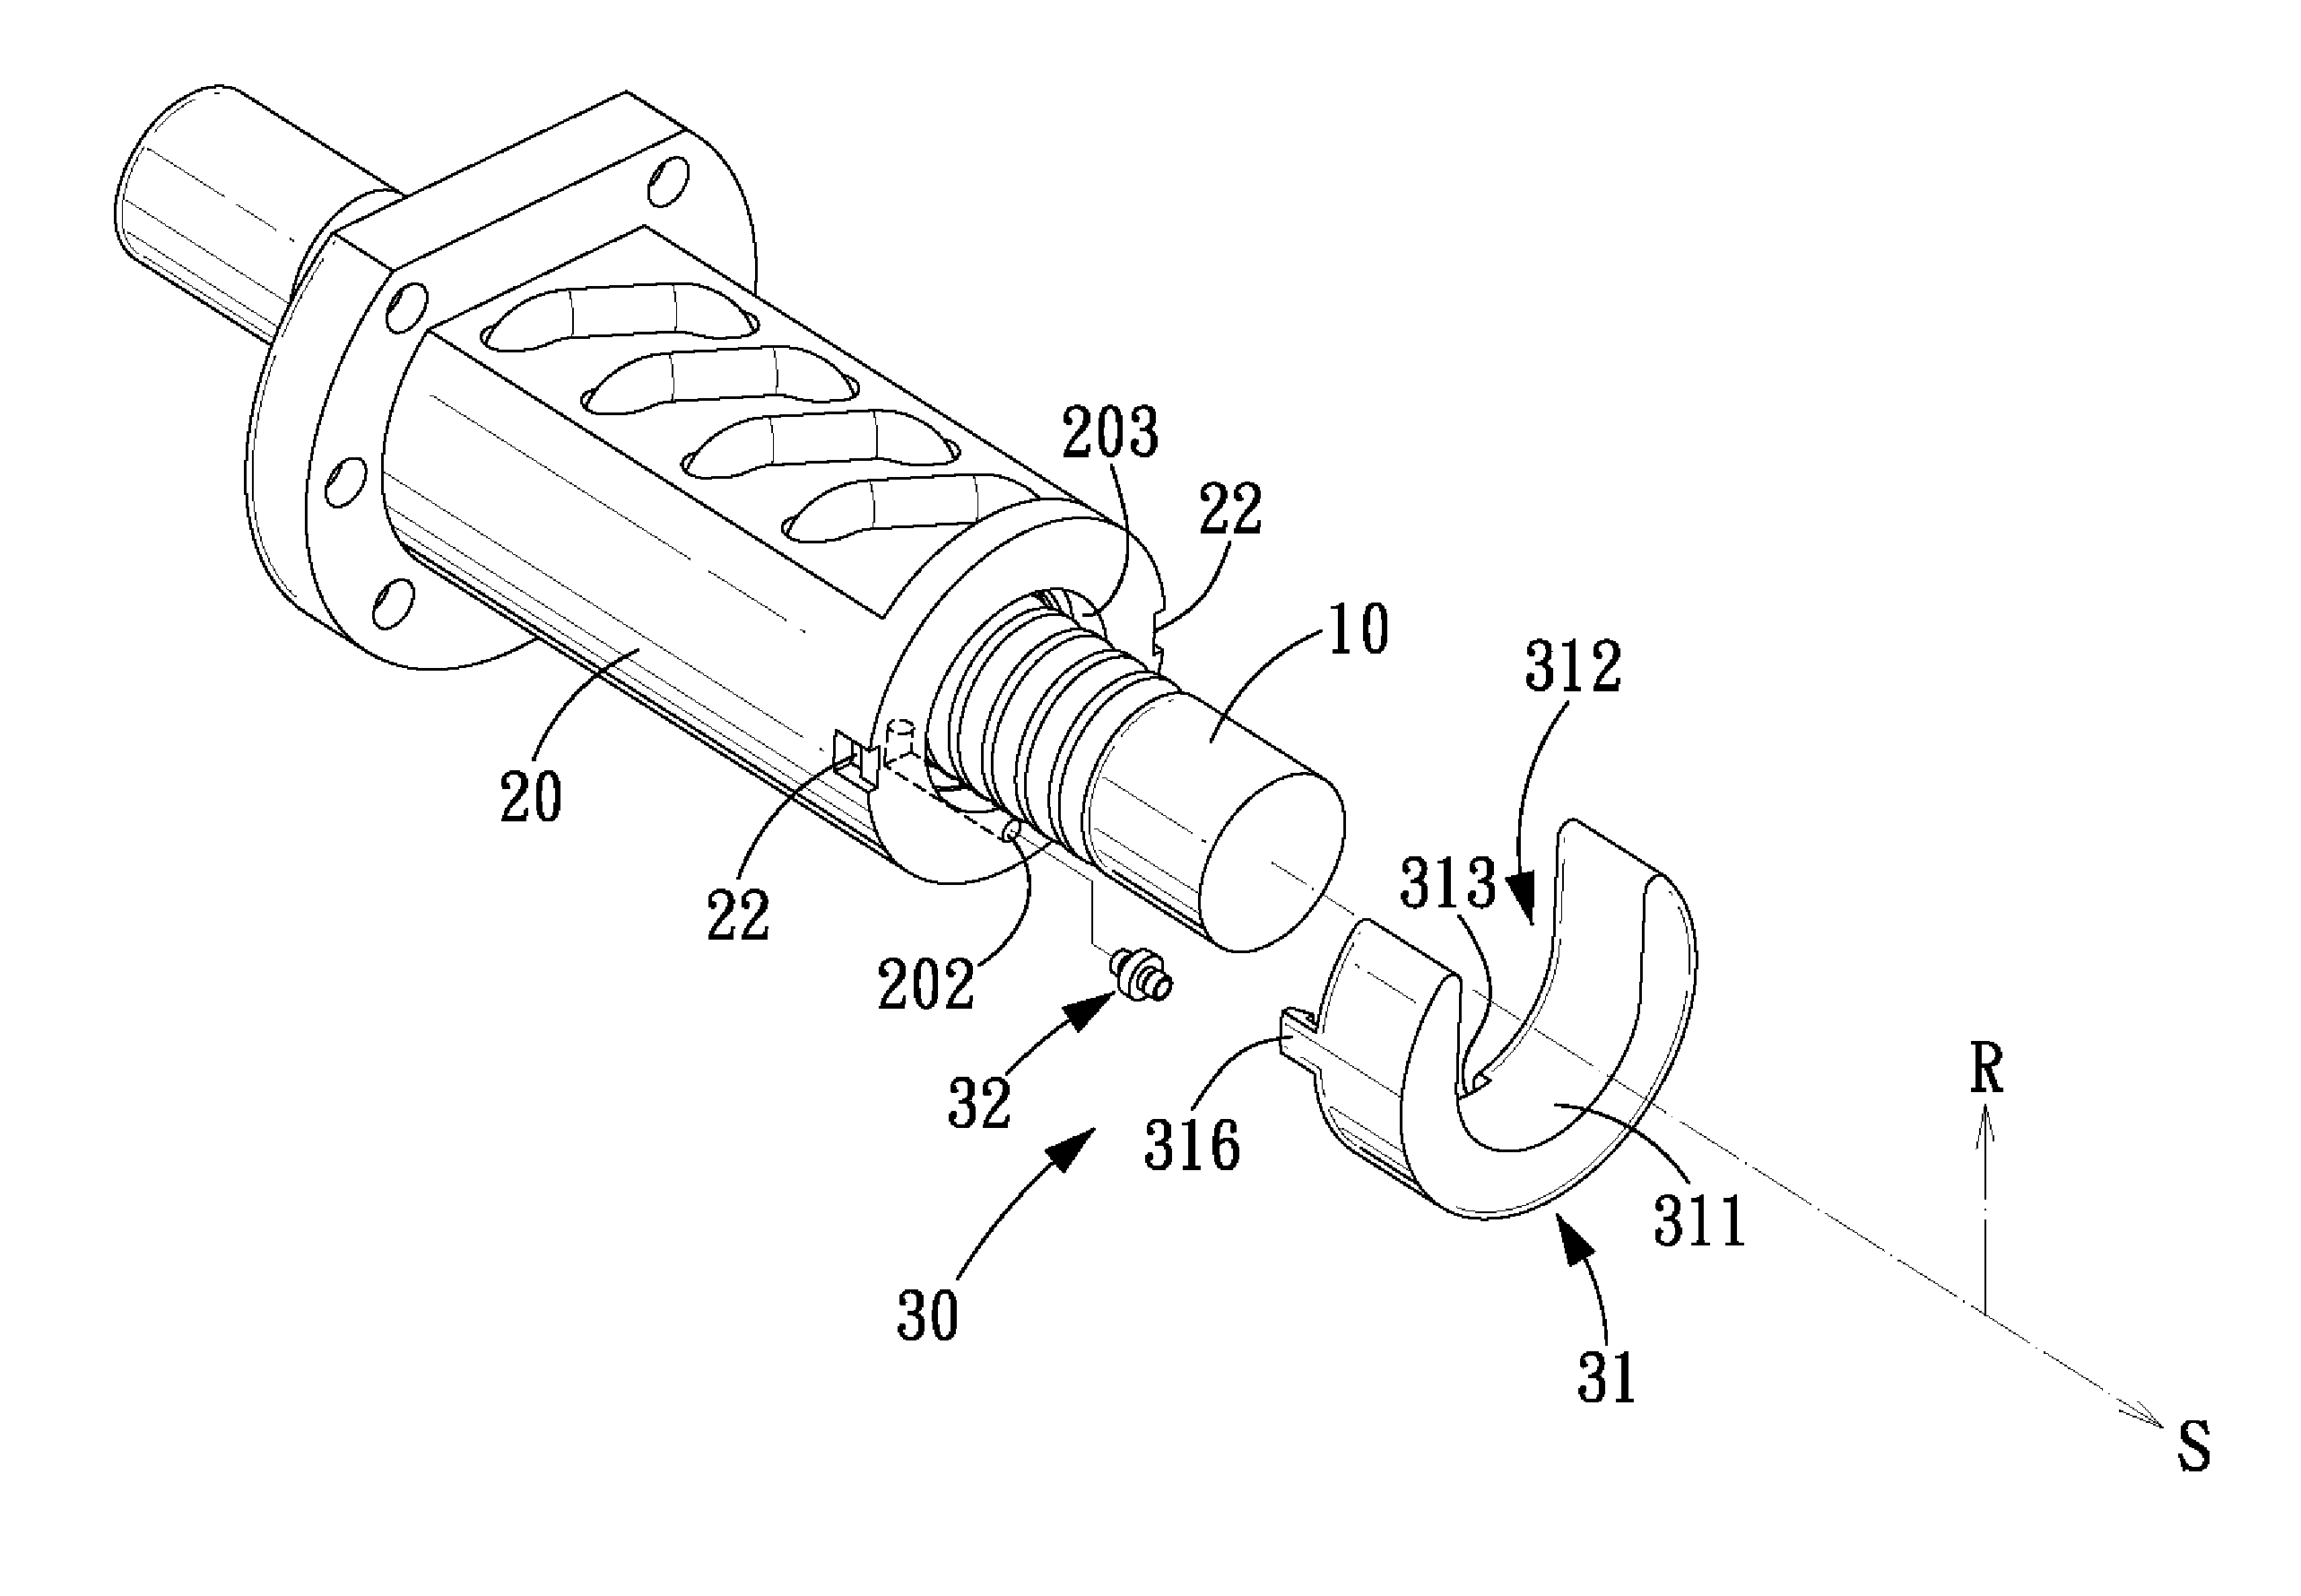 Ball screw with an oil-storage unit